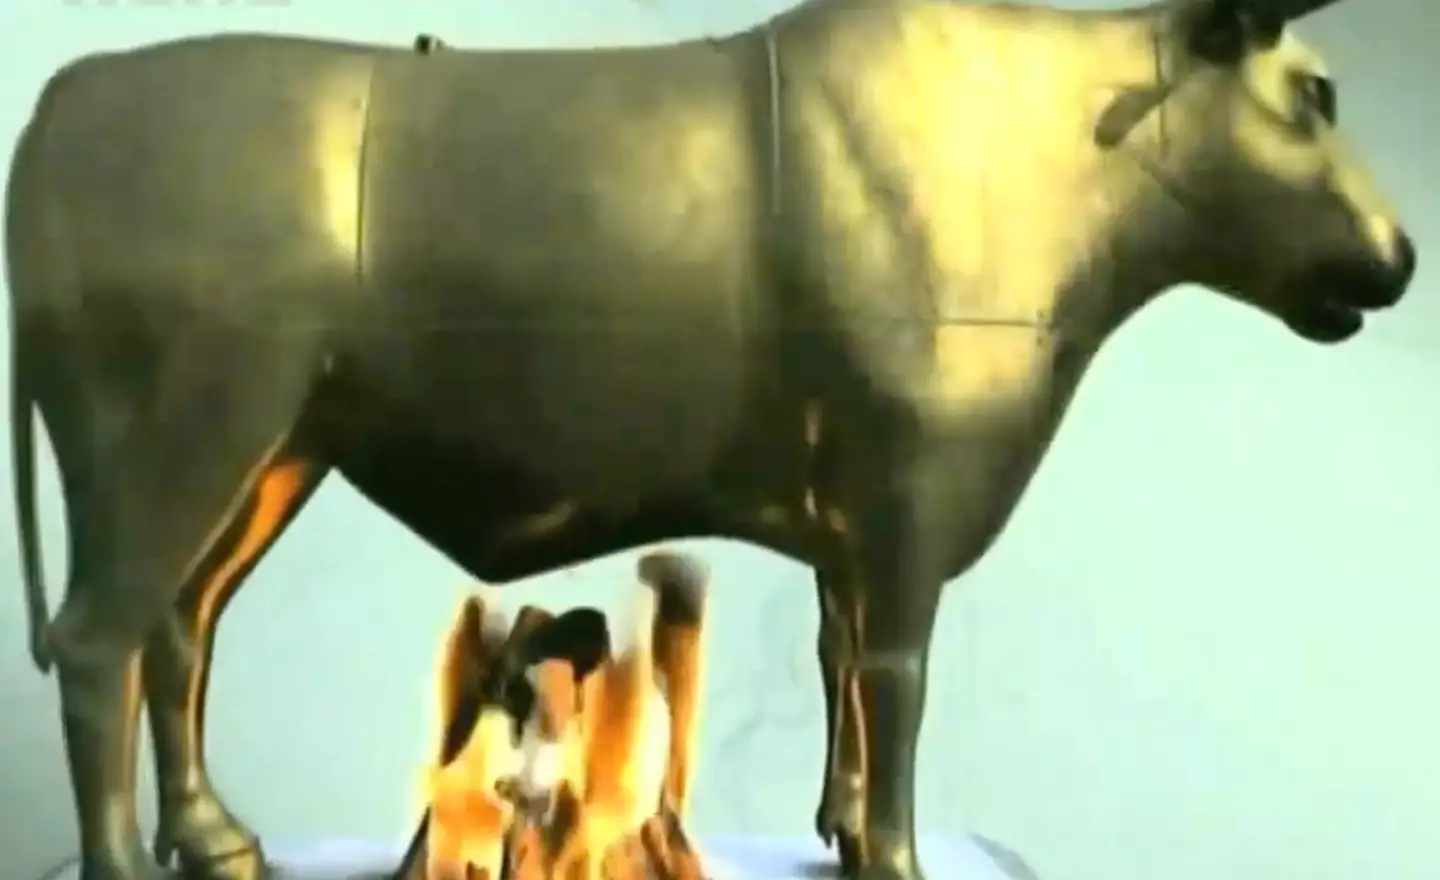 The Brazen Bull was not a happy ending to life. (Discovery)